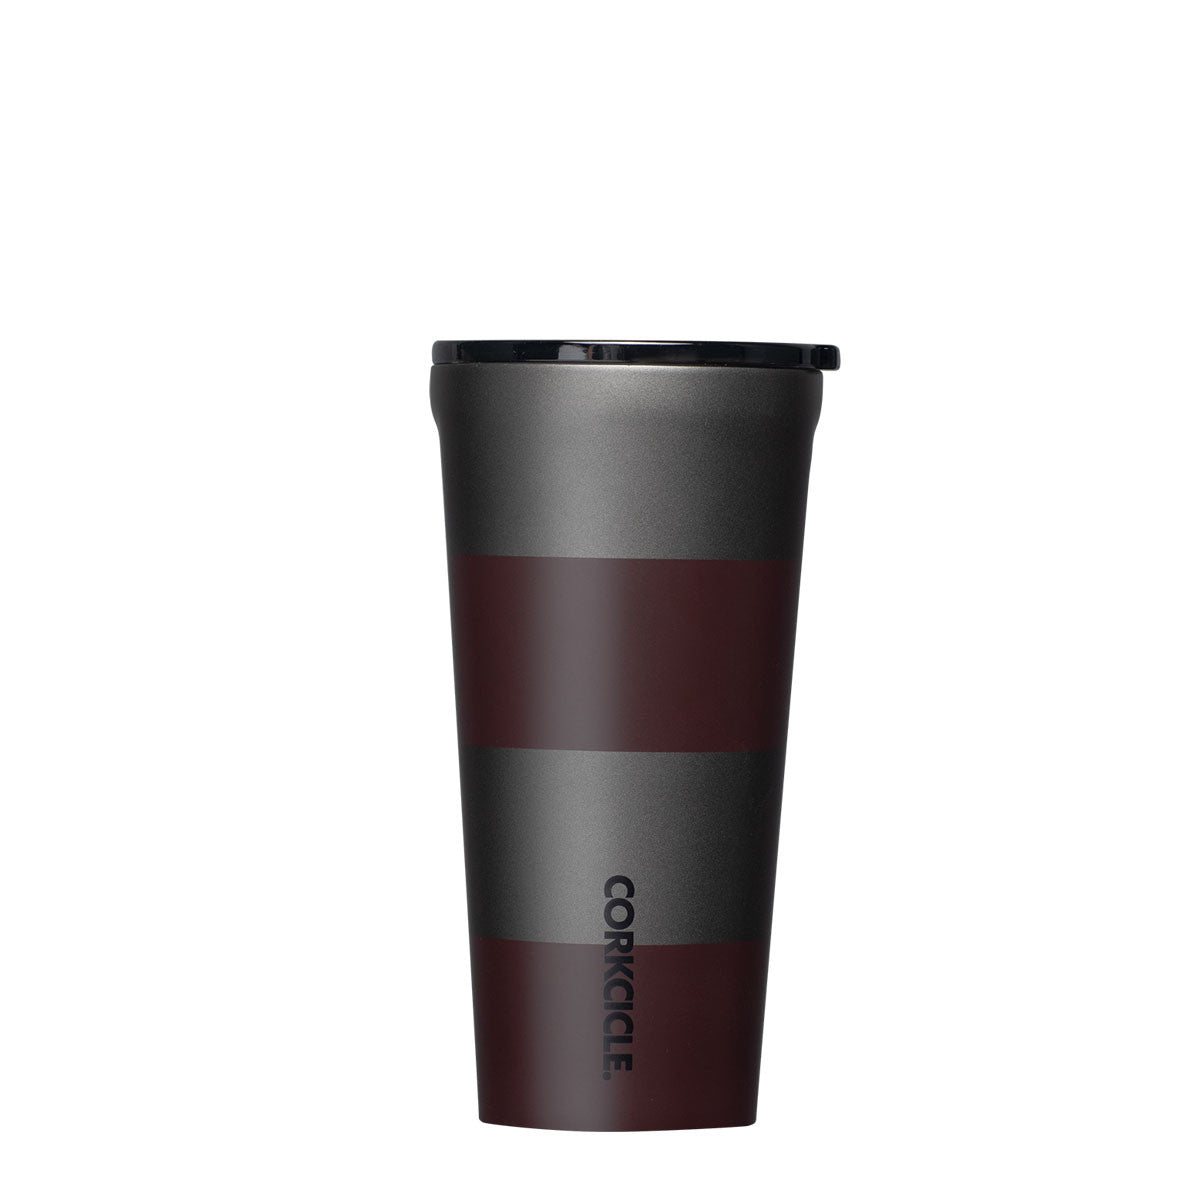 Ombre Fairy 16 oz Stainless Steel Travel Mug by Corkcicle